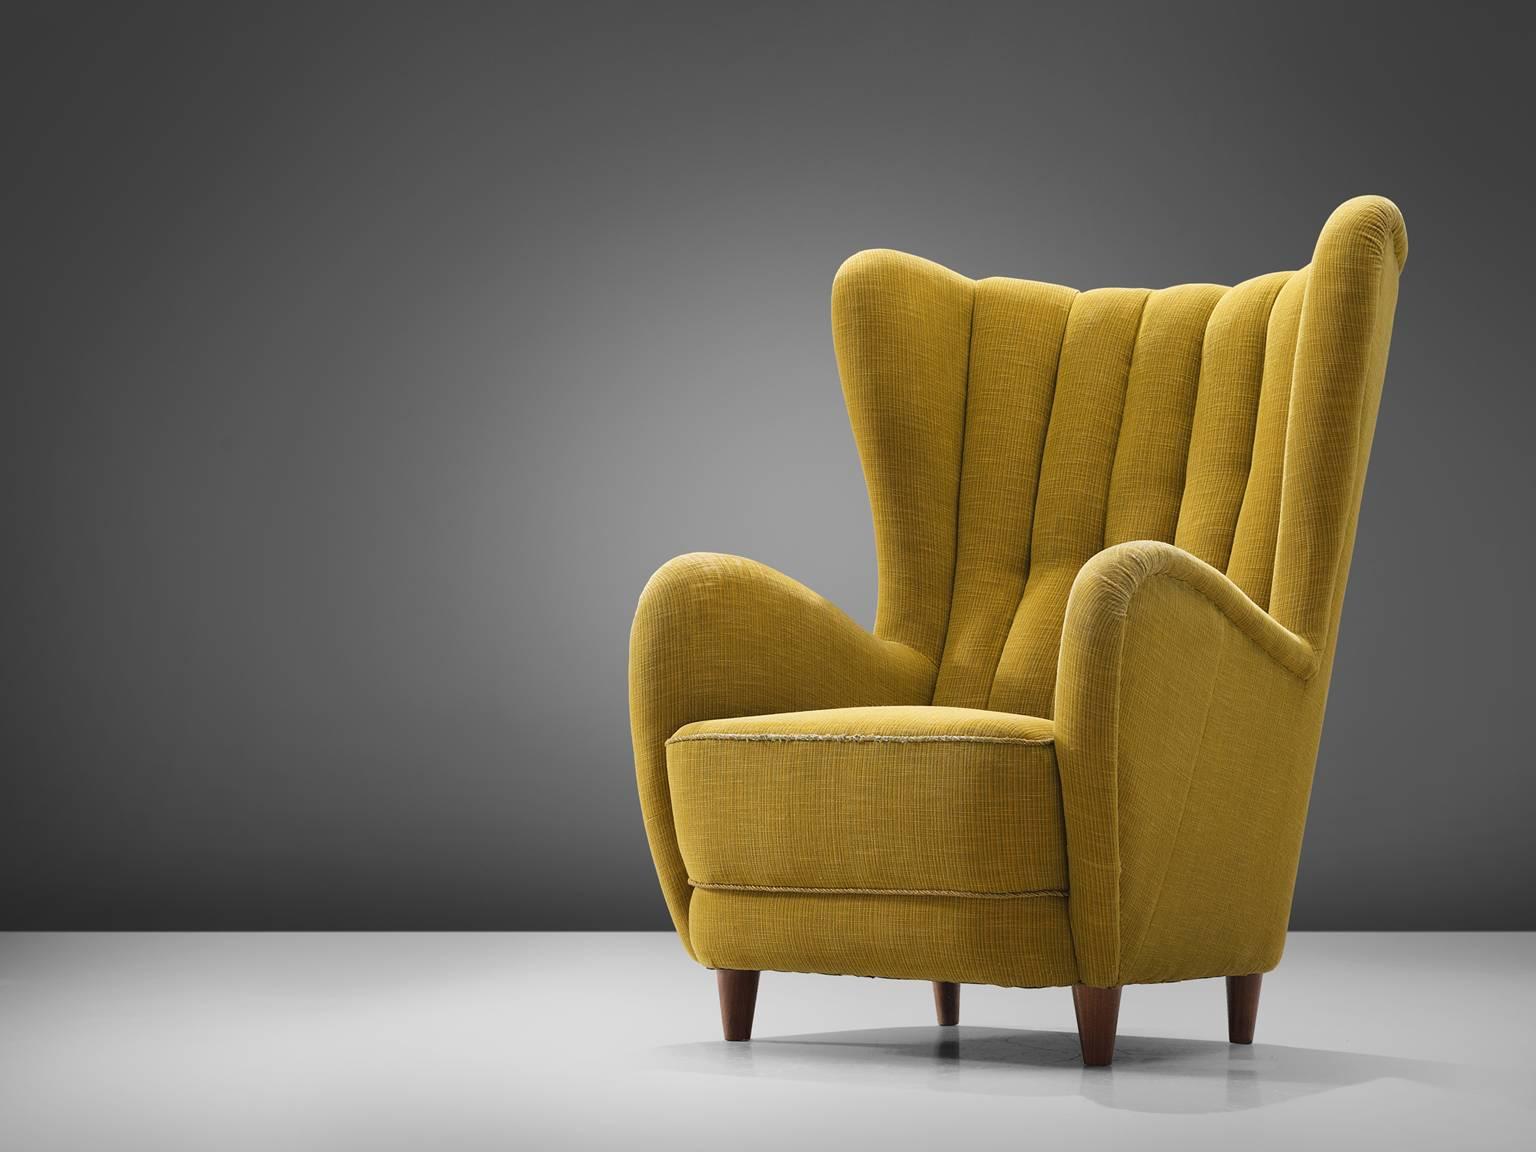 Danish cabinetmaker attributed to Mogens Lassen, wingback chair, stained beech legs, yellow fabric, Denmark, circa 1940

This easy chair has a grand wing and a sectioned back. The seat is thick and the armrests are thick, full and rounded. The